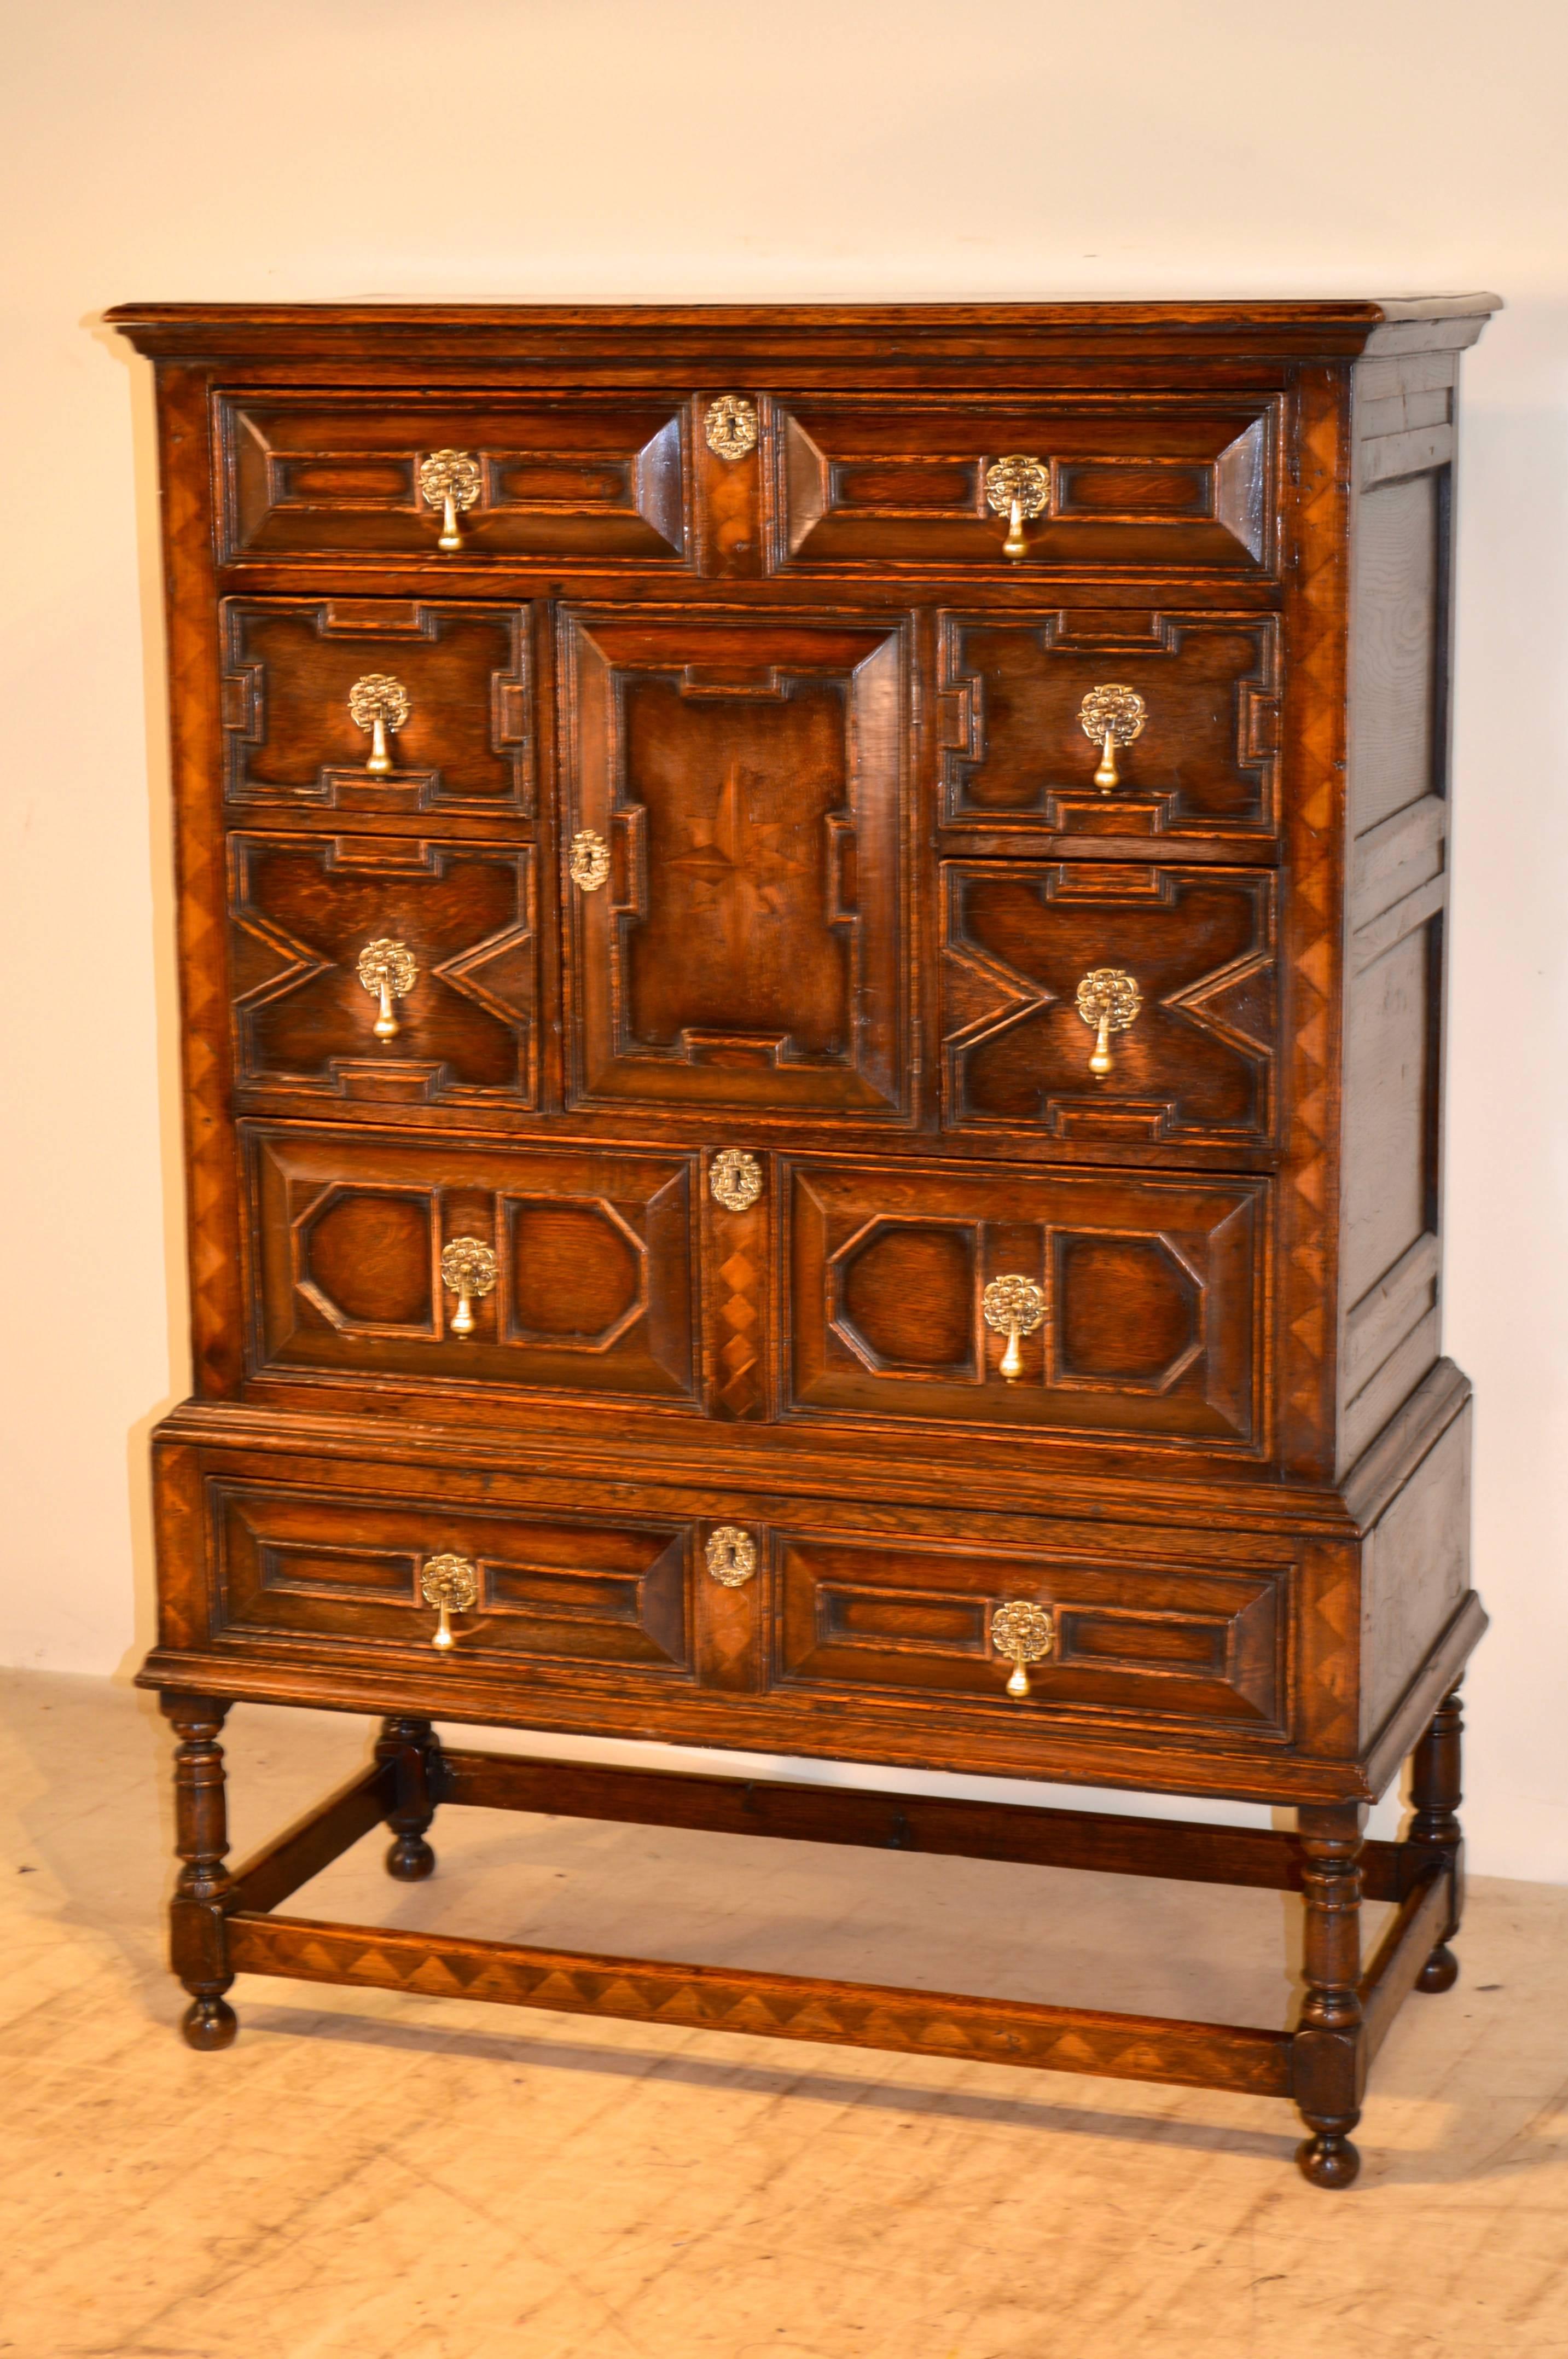 Edwardian Chest on Stand, circa 1900